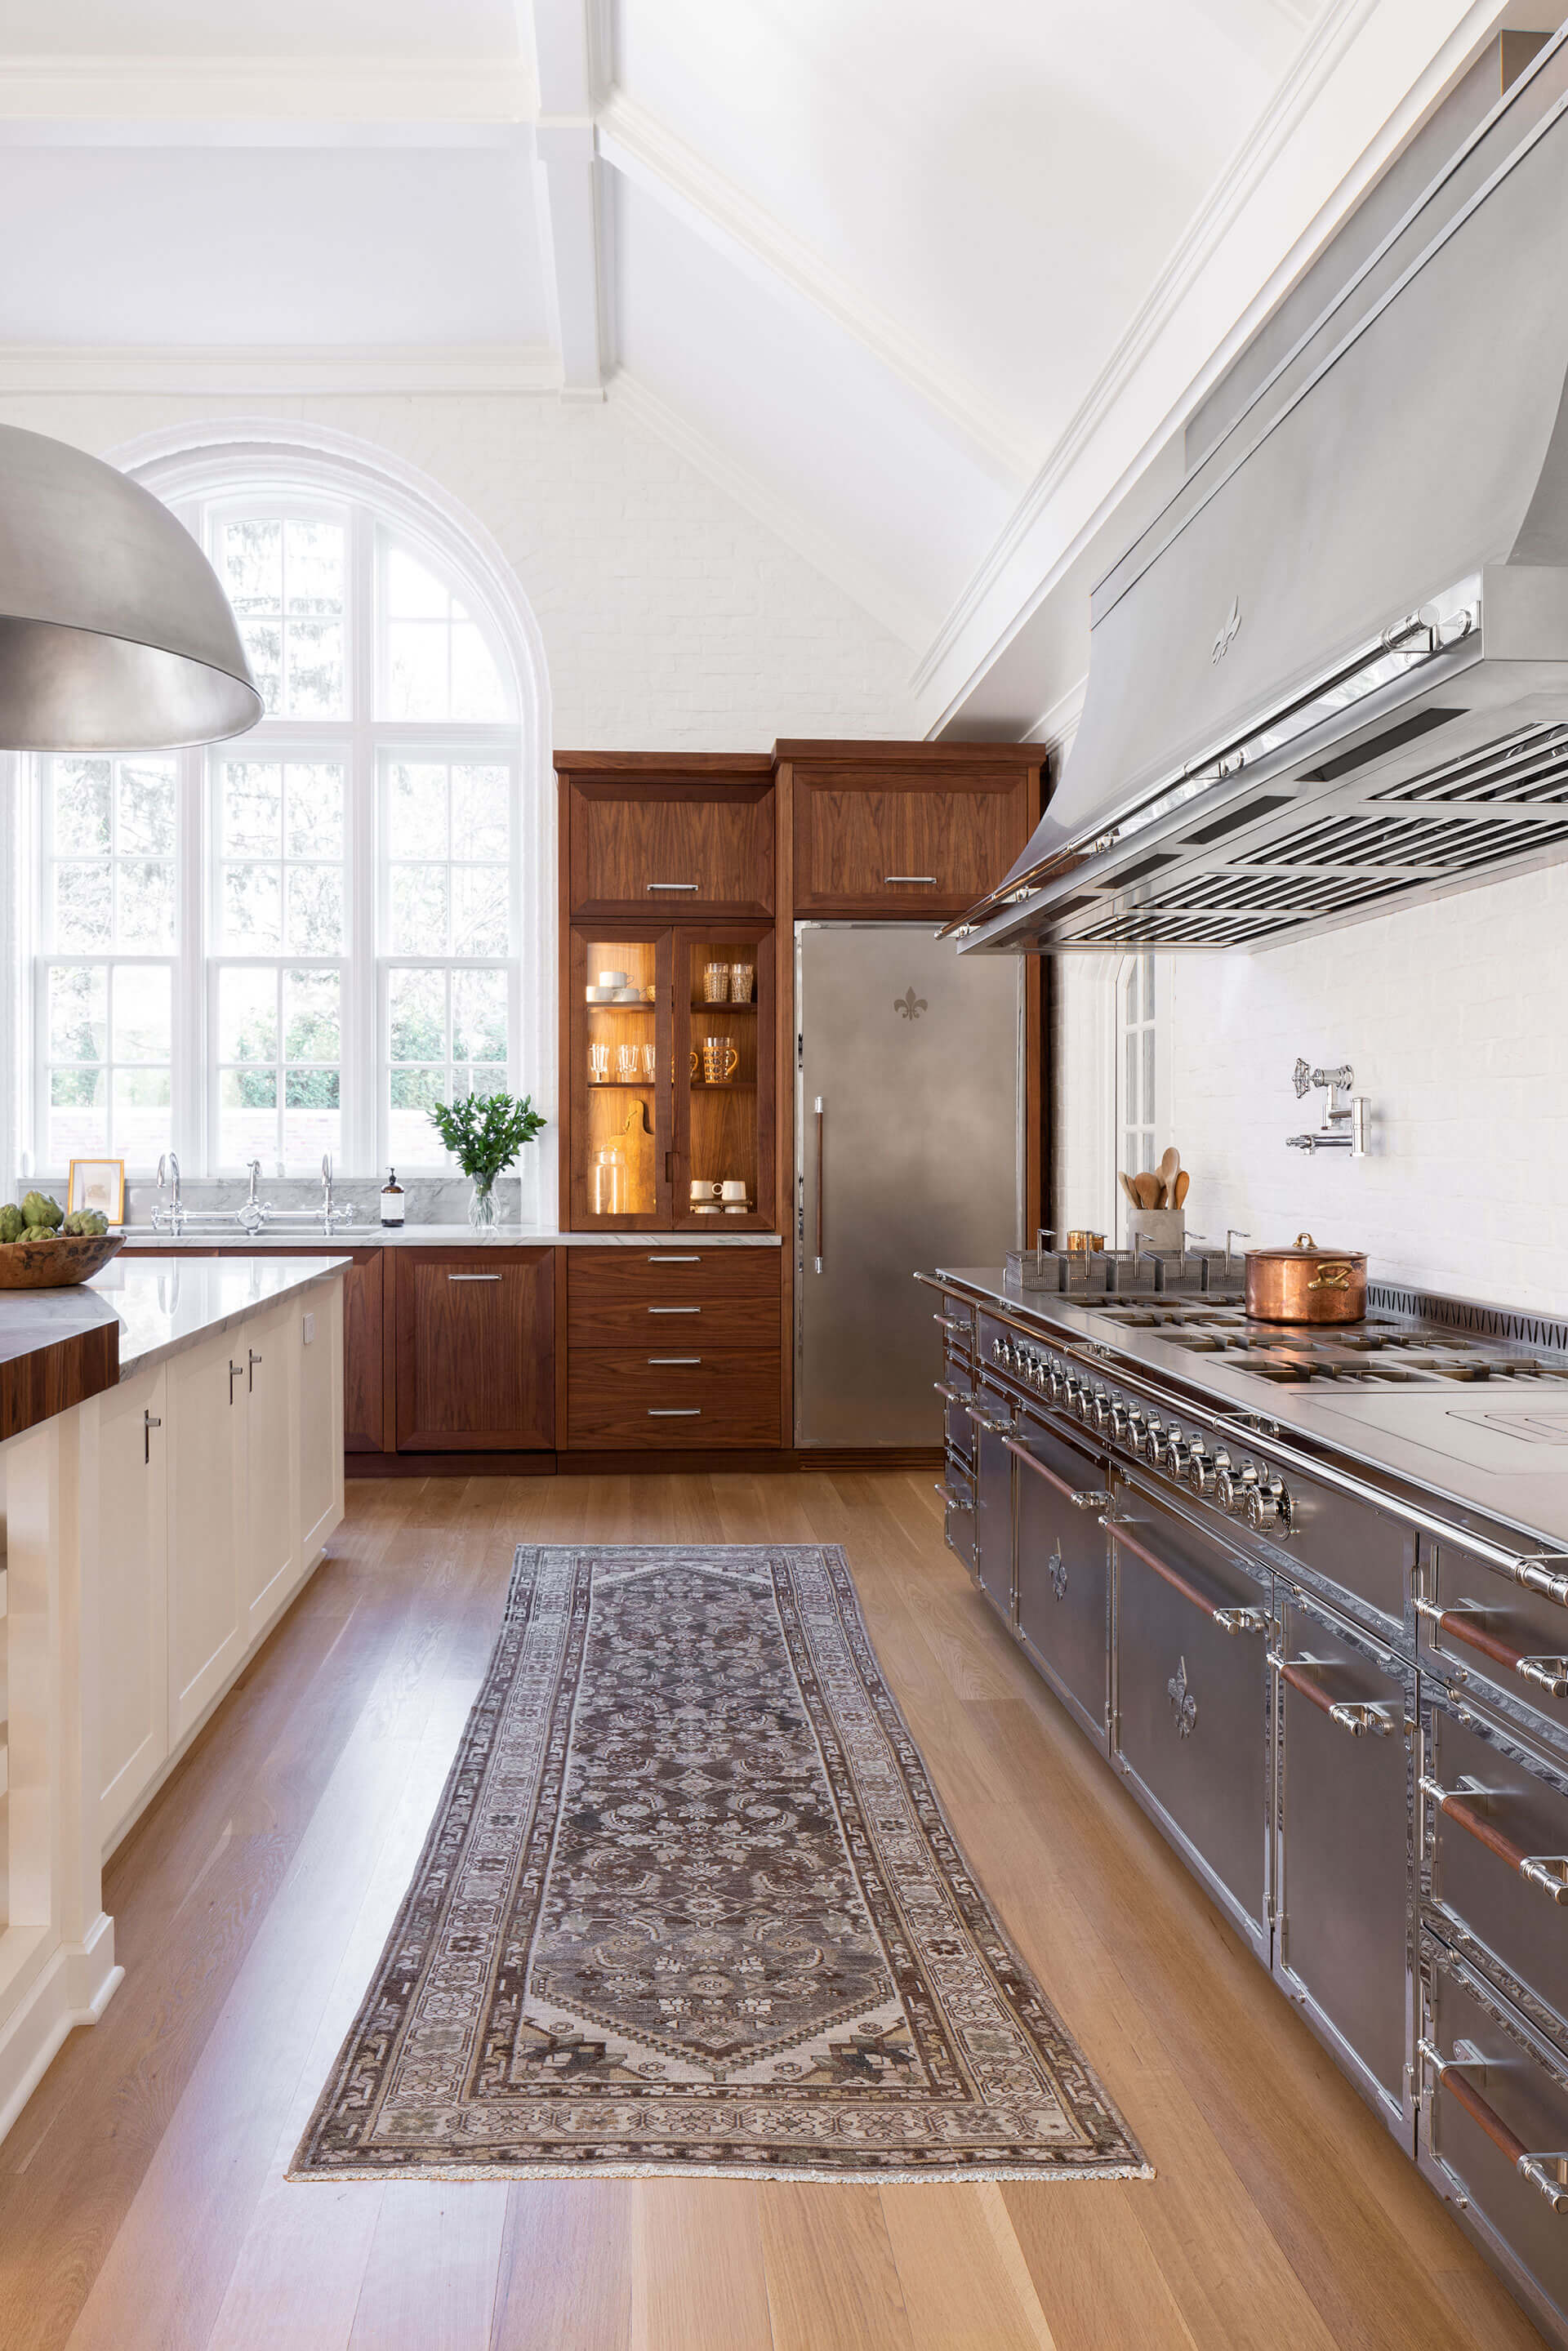 Silver French Kitchen Range with burners, stoves and a hood, rug on the wooden Flooring